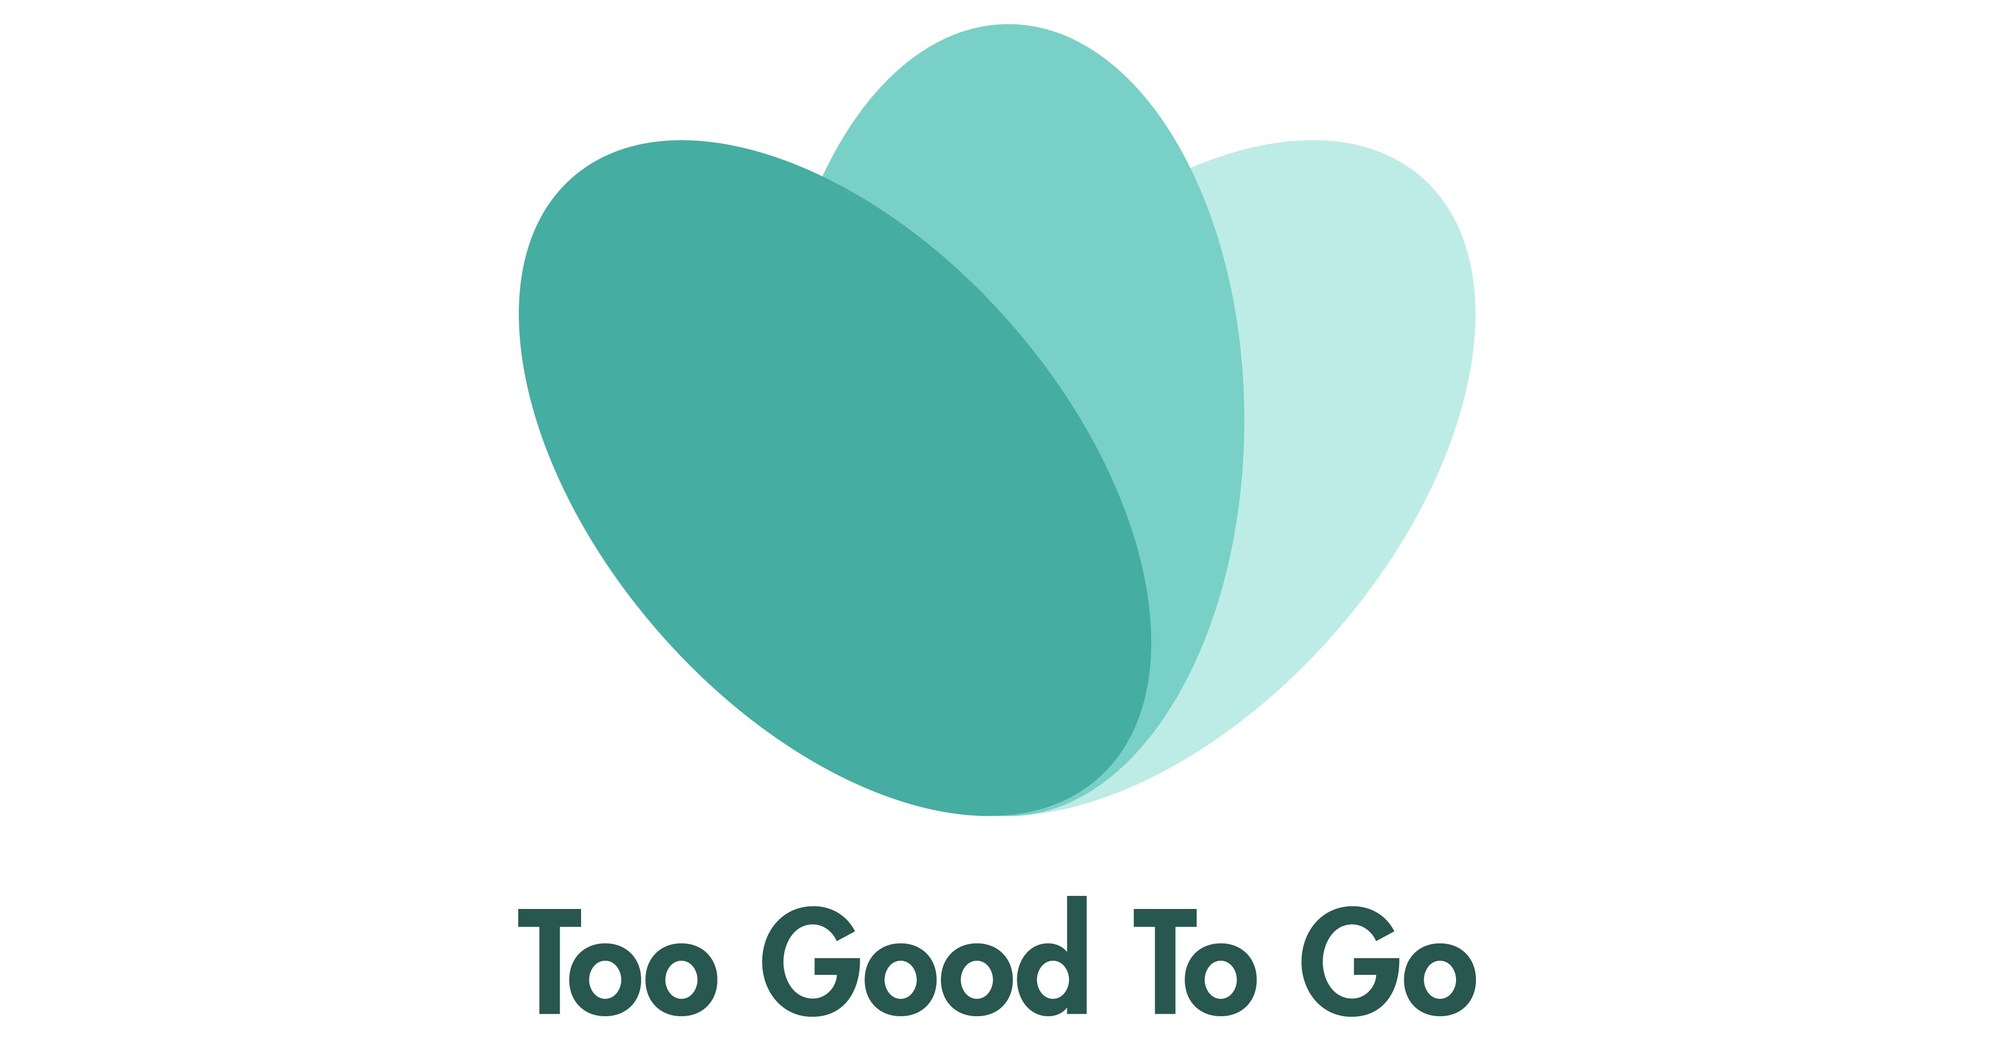 Too Good To Go Celebrates 1.5 Million Americans and 1 Year